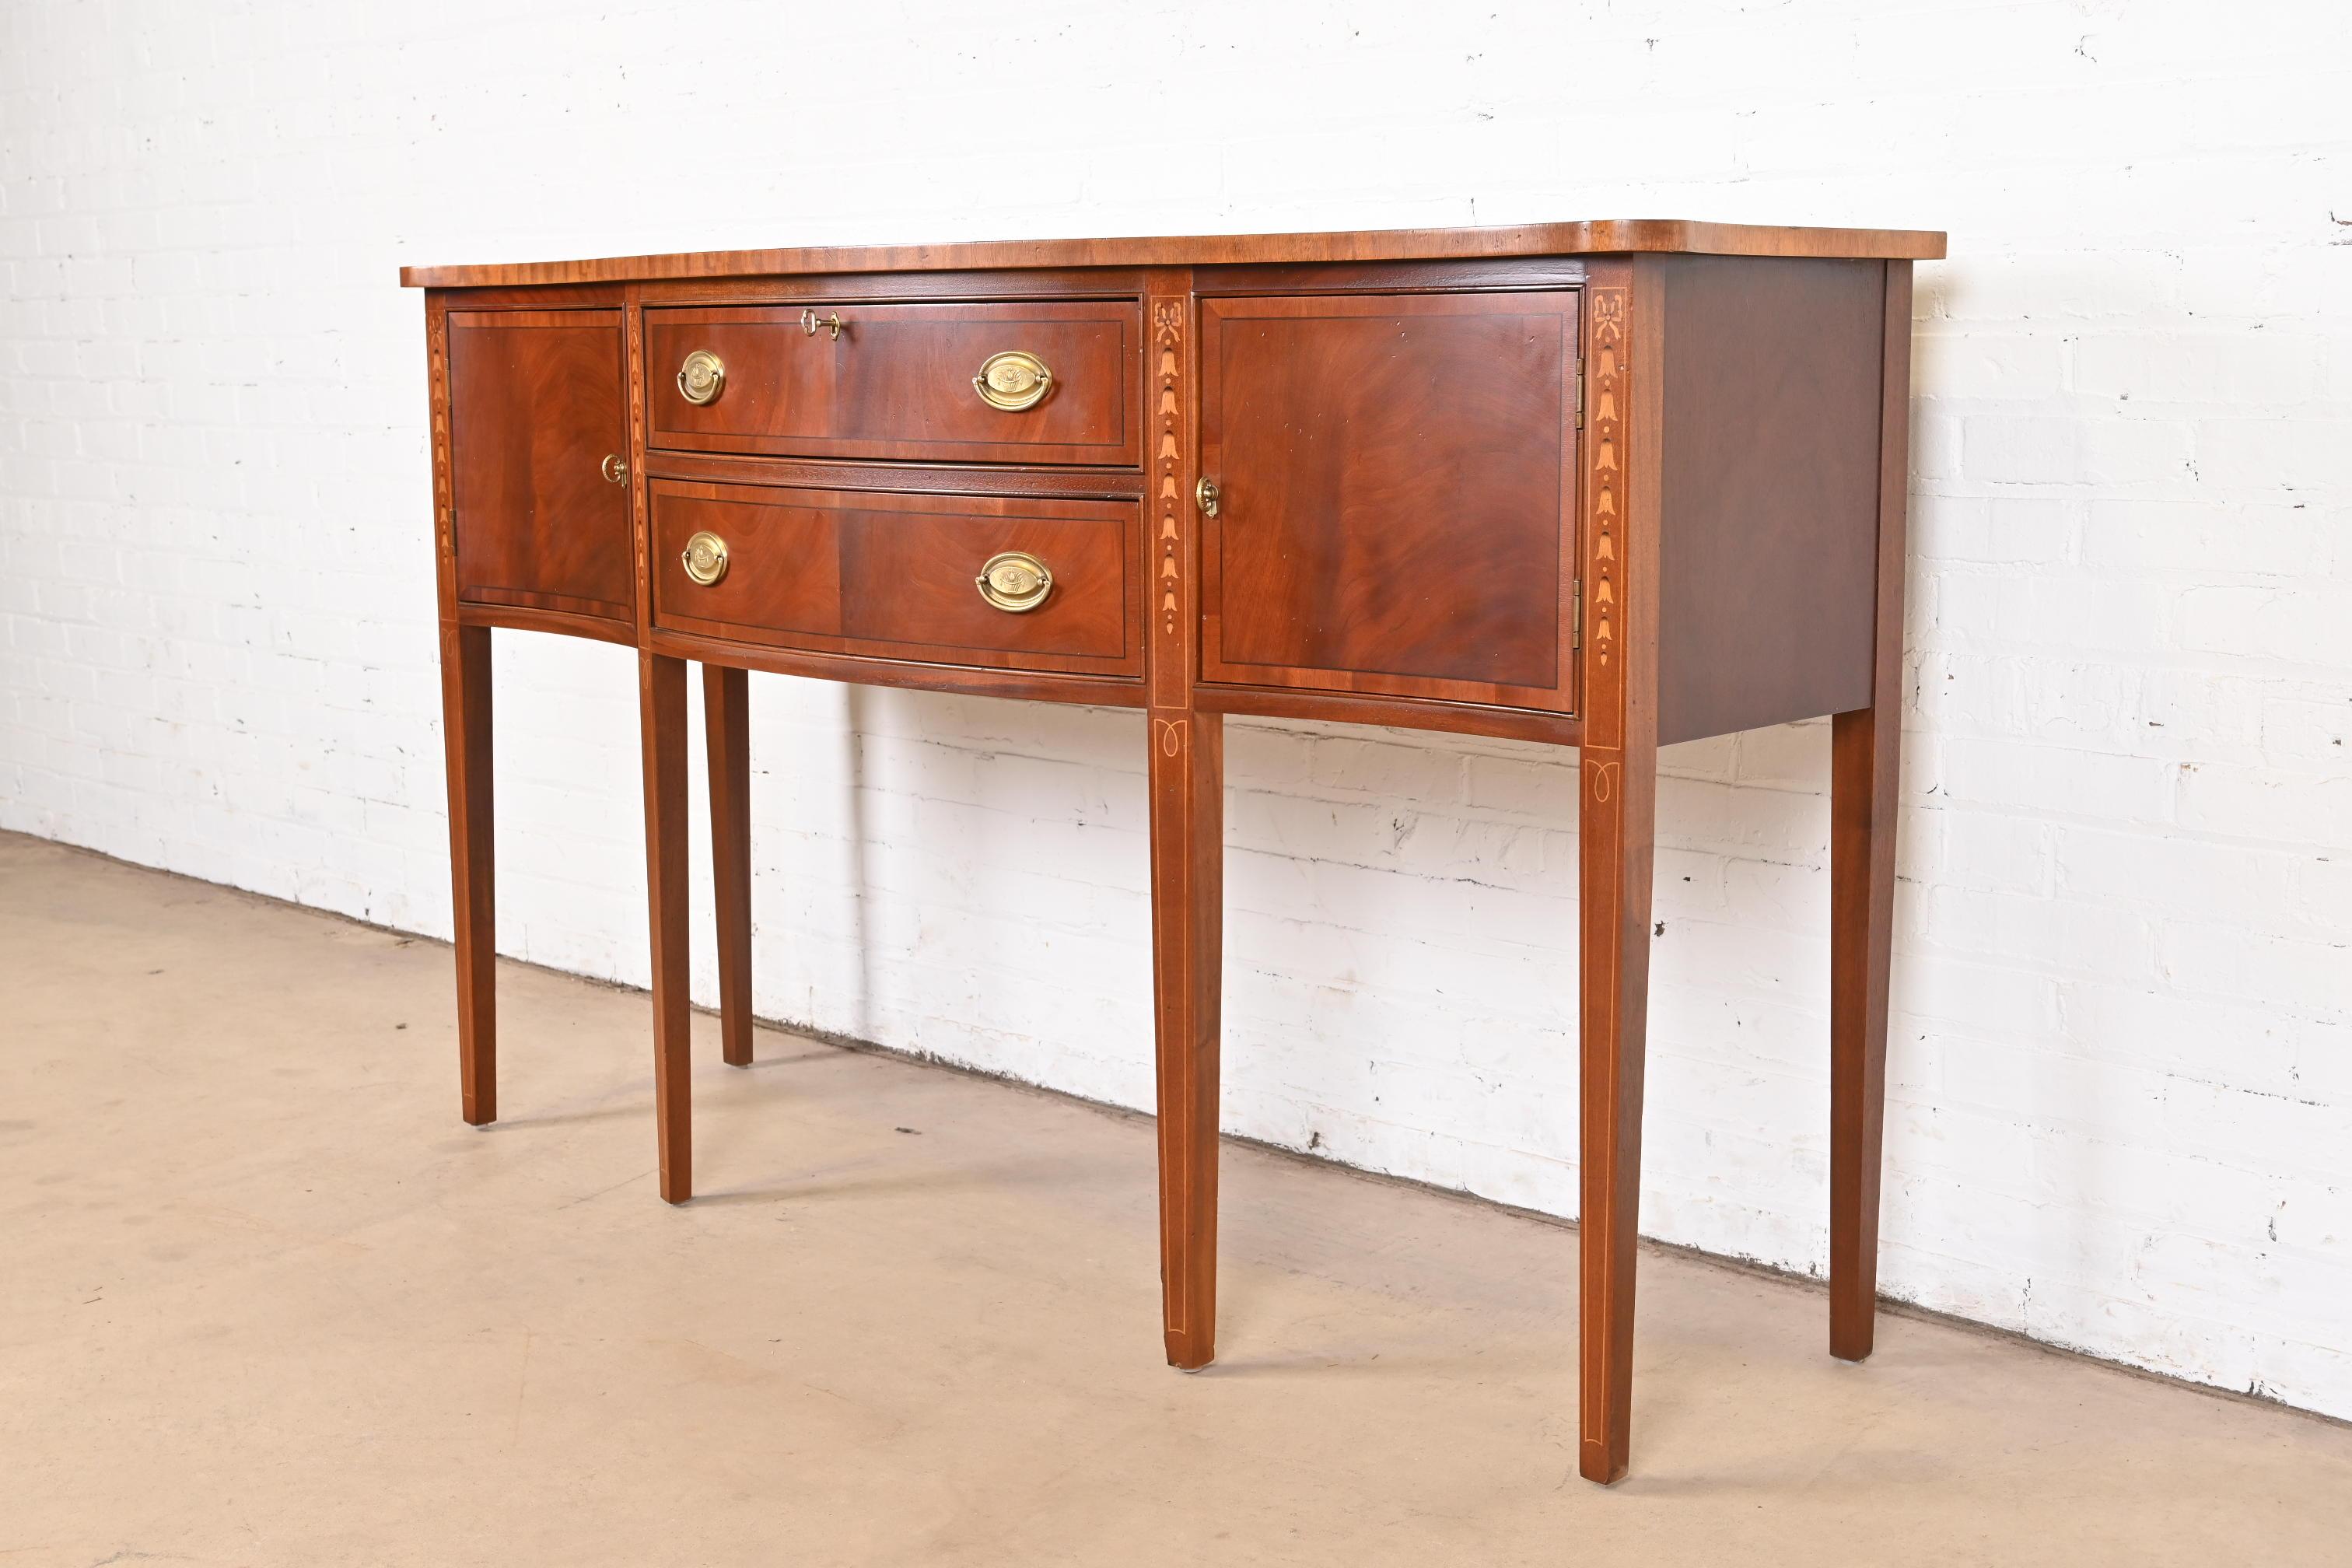 Hepplewhite Inlaid Mahogany Serpentine Front Sideboard Buffet or Credenza In Good Condition For Sale In South Bend, IN